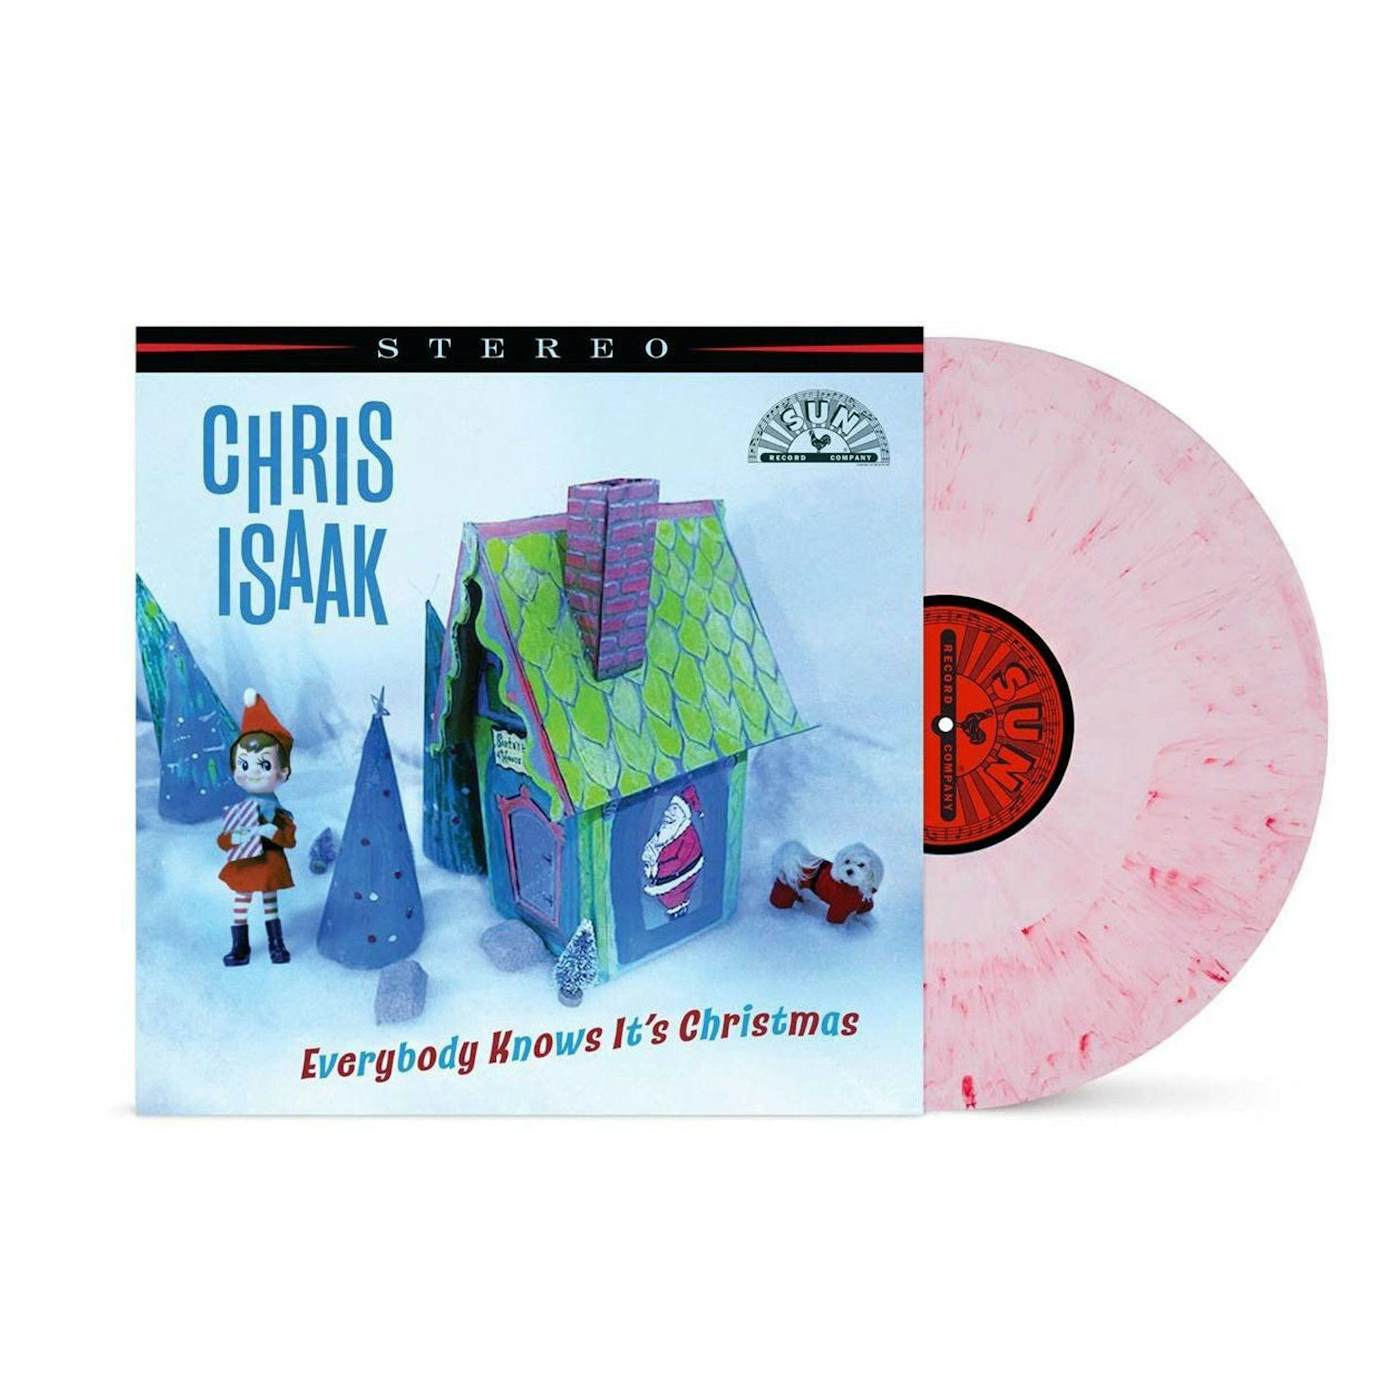 Chris Isaak Everybody Knows It's Christmas (Candy Floss) Vinyl Record